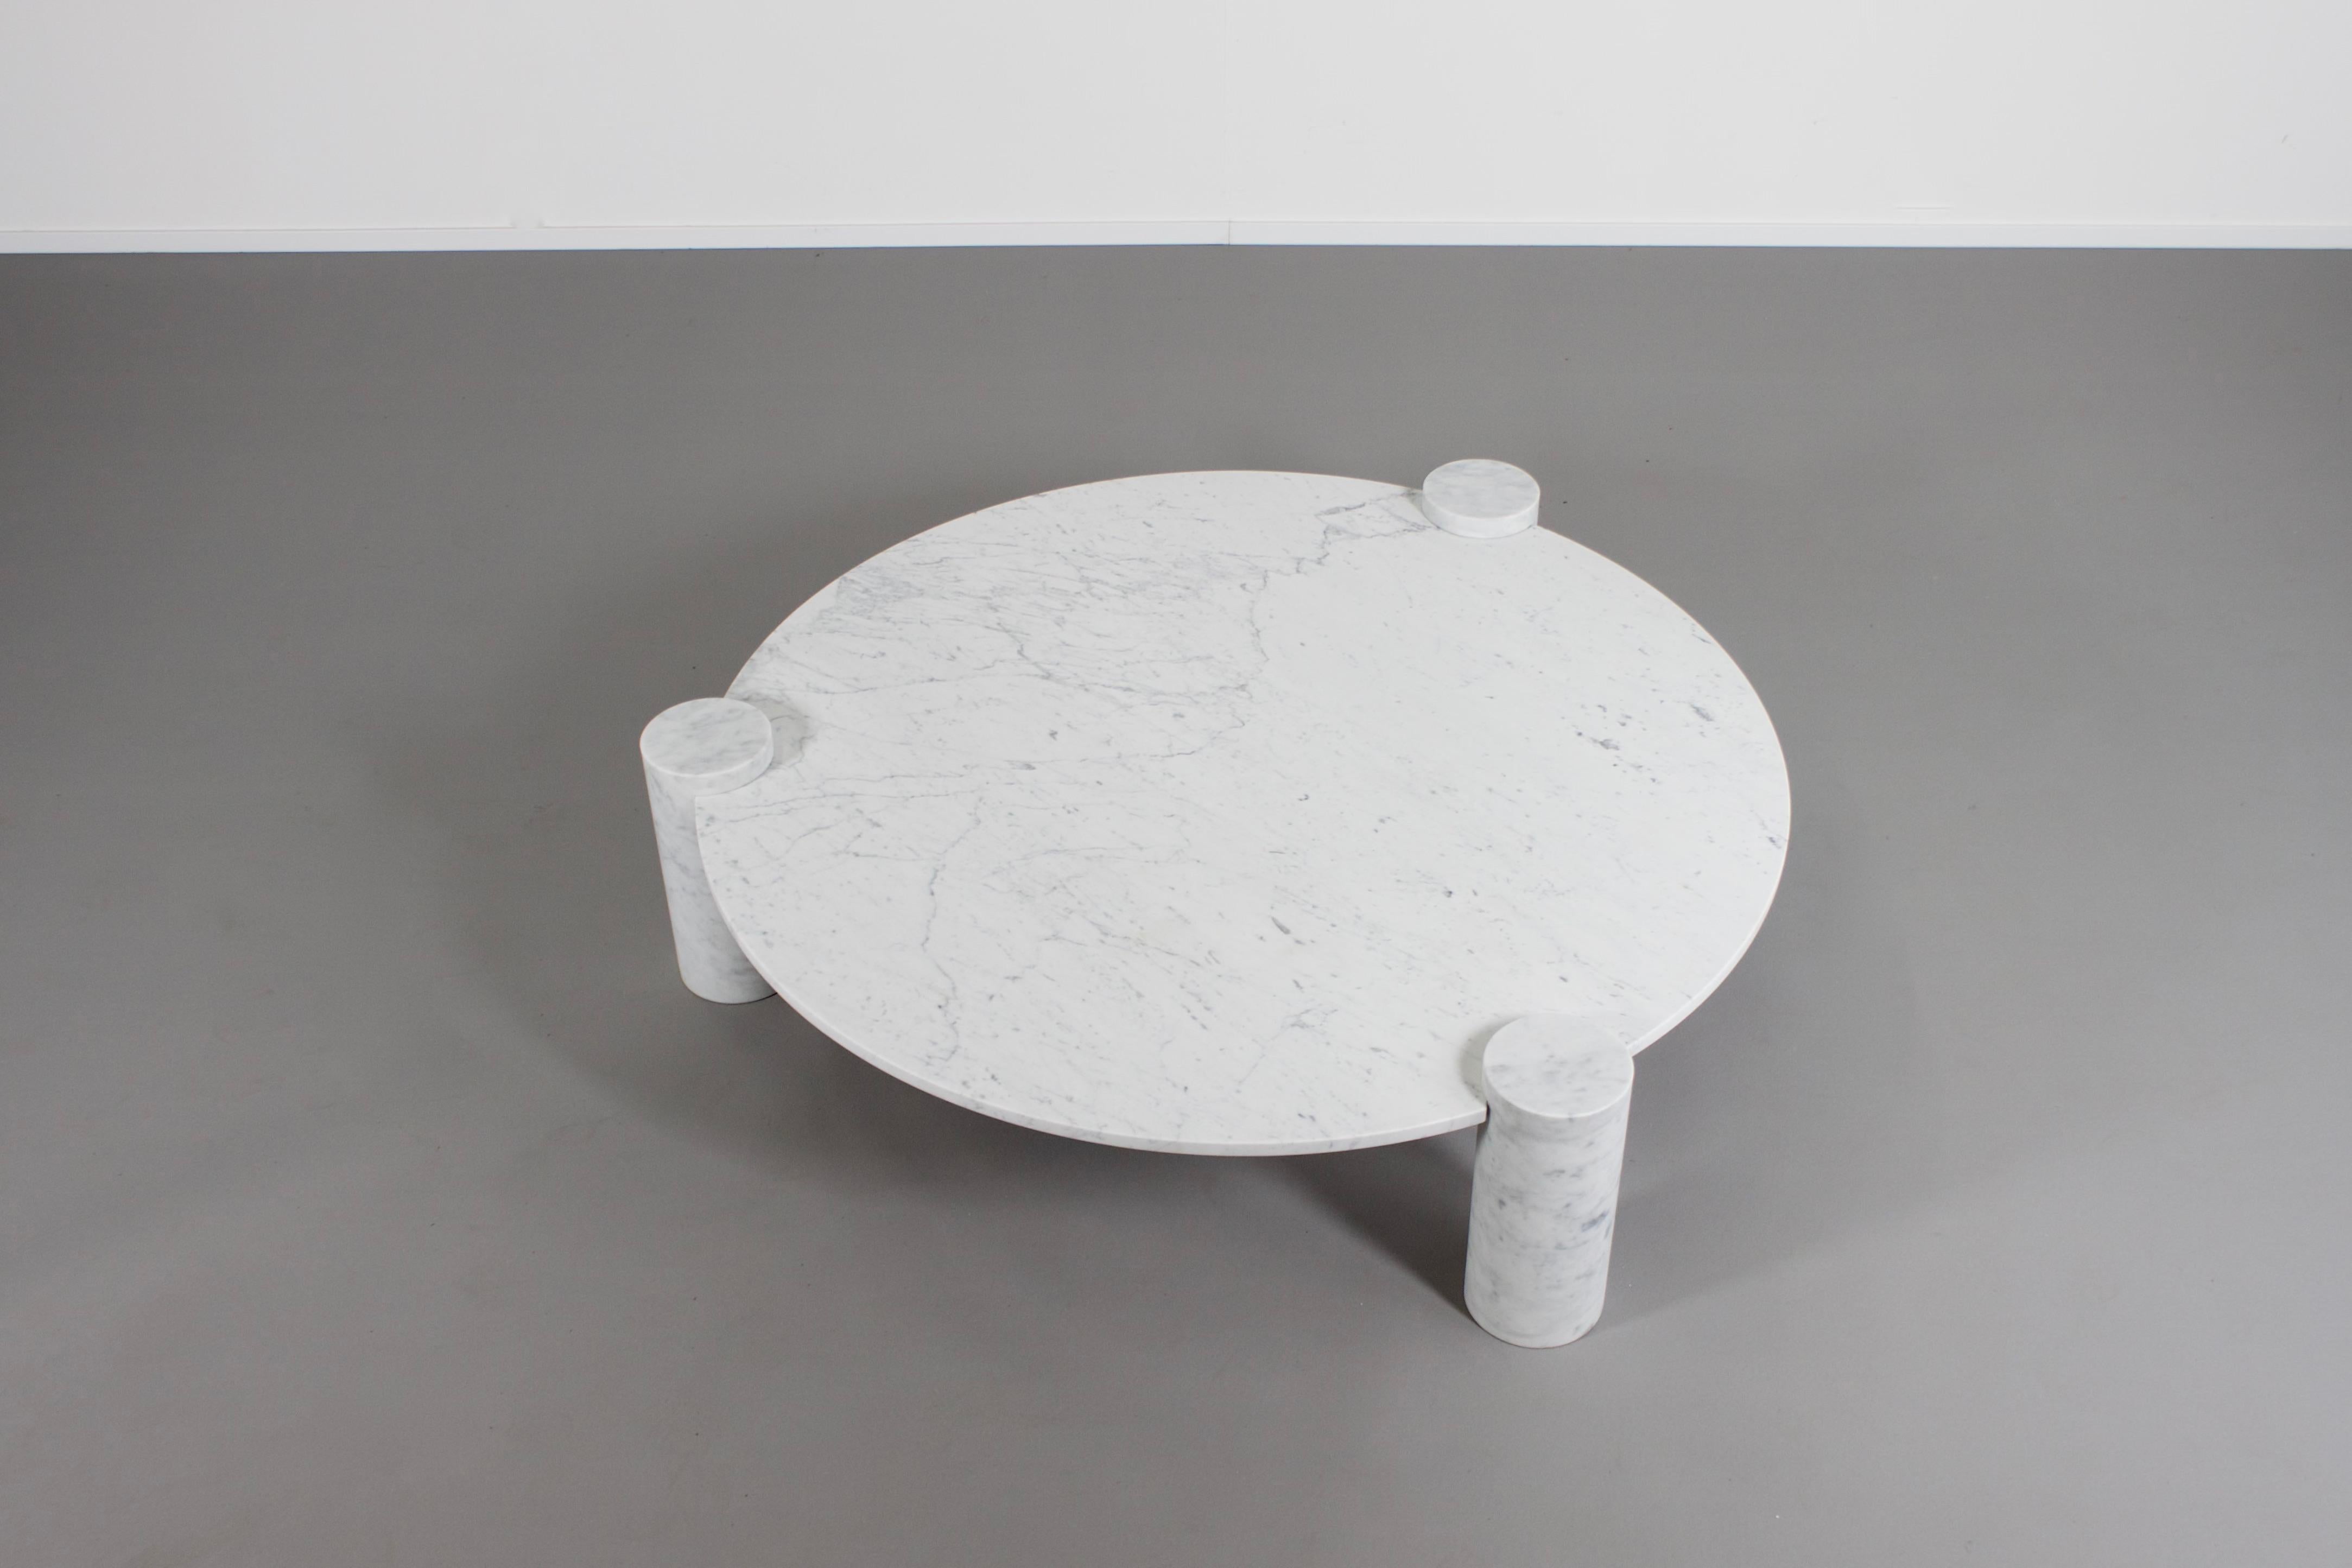 Fantastic round coffee table in excellent condition.

Made in Italy in the late 1970s

This particular table consists of a white Carrara marble top and round Carrara marble bases.

The three round solid marble bases have a slot which fits into